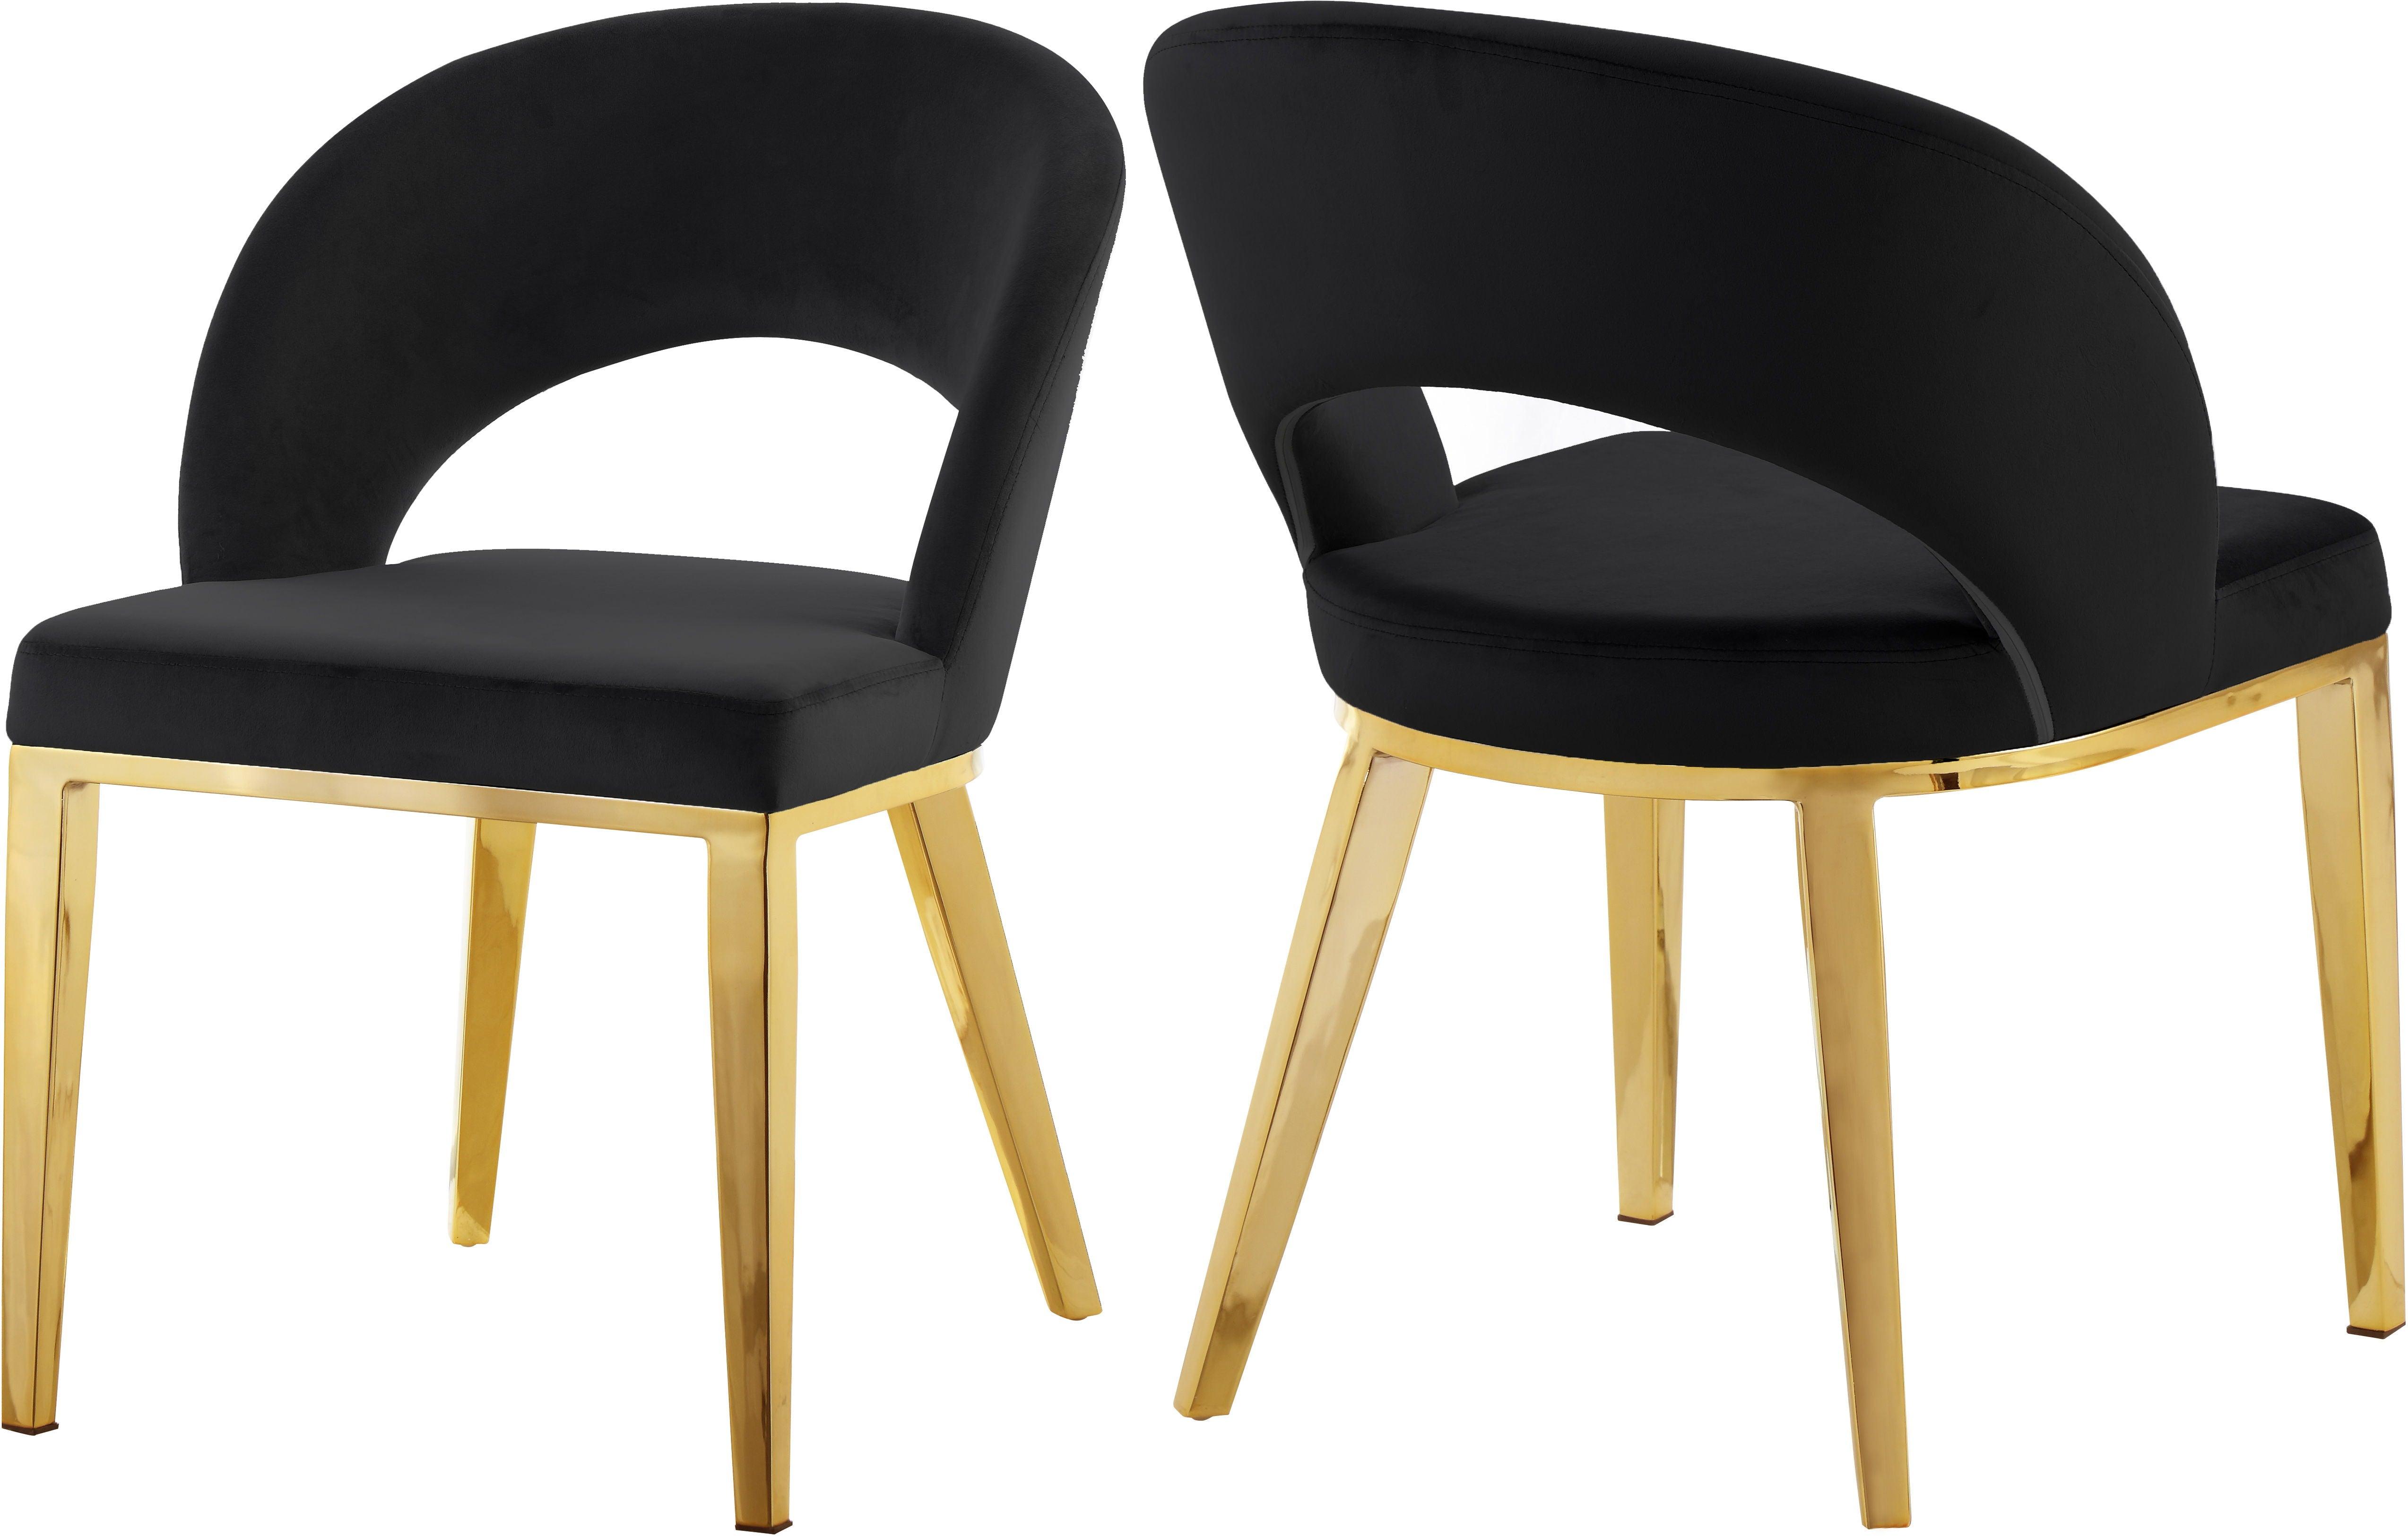 Meridian Furniture - Roberto - Dining Chair with Gold Legs - 5th Avenue Furniture